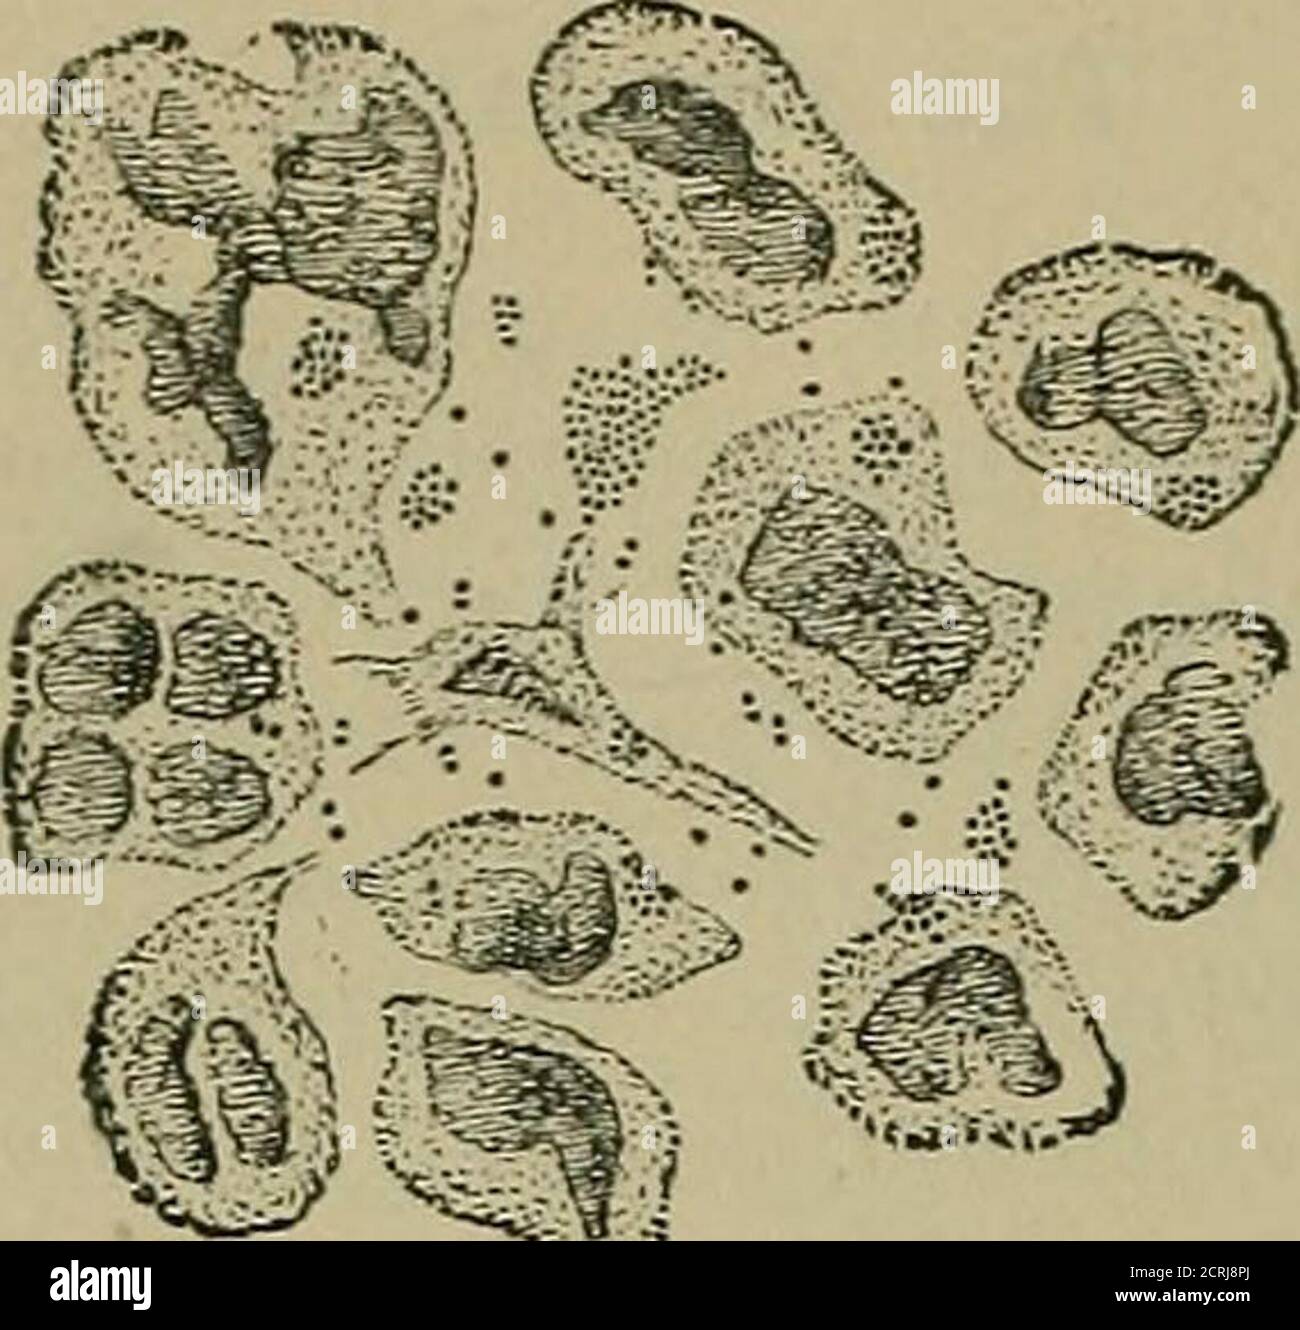 . A practical treatise on medical diagnosis for students and physicians . iortals, it may enter the tissue through abrasions or the hair-follicles. Morphology. In cover-glass preparations they appear as small, roundbodies scattered among the j)us-cells, rarely within them, single, in pairsor in clusters. Thev stain readily with the basic aniline dyes. (SeeFig. 275.) Fig. 275.. m ^ci ■^■r^:i Pus with staphylococcus. X 800. (FLrGGE.) 2. Staphylococcus Pyogenes Albus. It is also found in acute abscesses,but less often than the aureus, and is less virulent. It is morpholog-ically identical with th Stock Photo